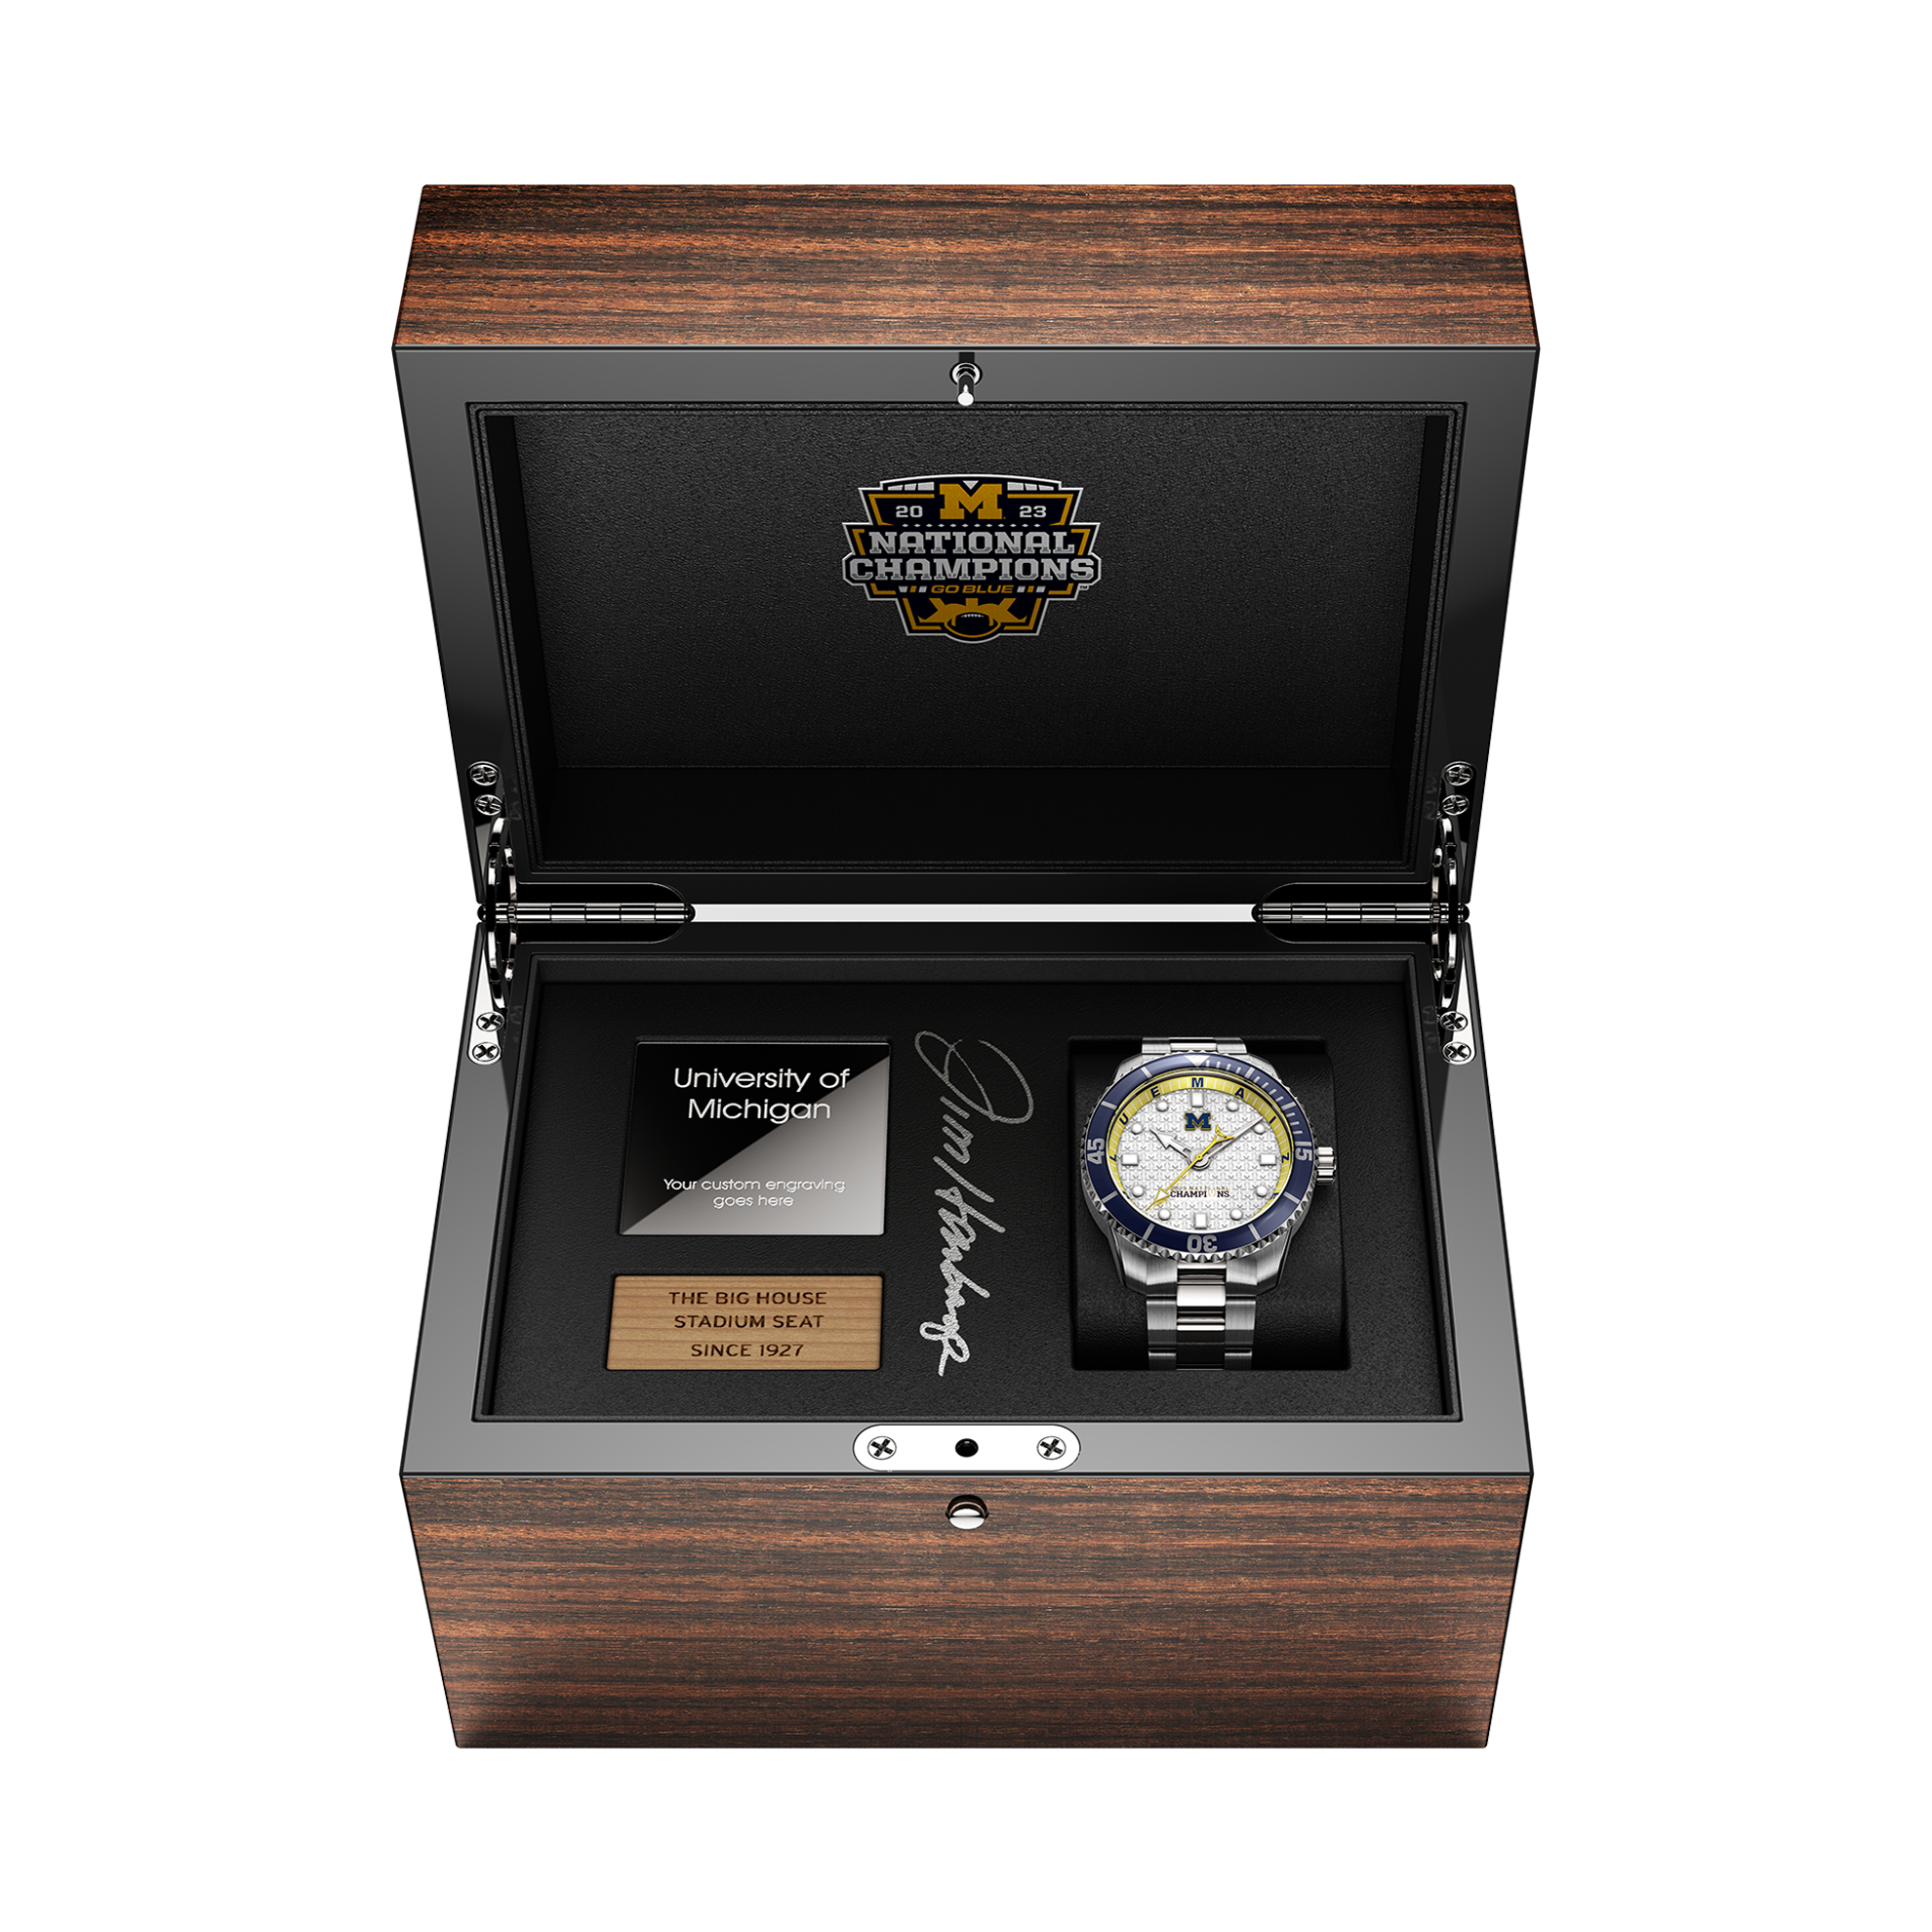 2023 Michigan National Champions Jim Harbaugh autographed display box with the Odysseus Swiss made automatic watch and a piece of wood from The Big House stadium seats originally installed in 1927.